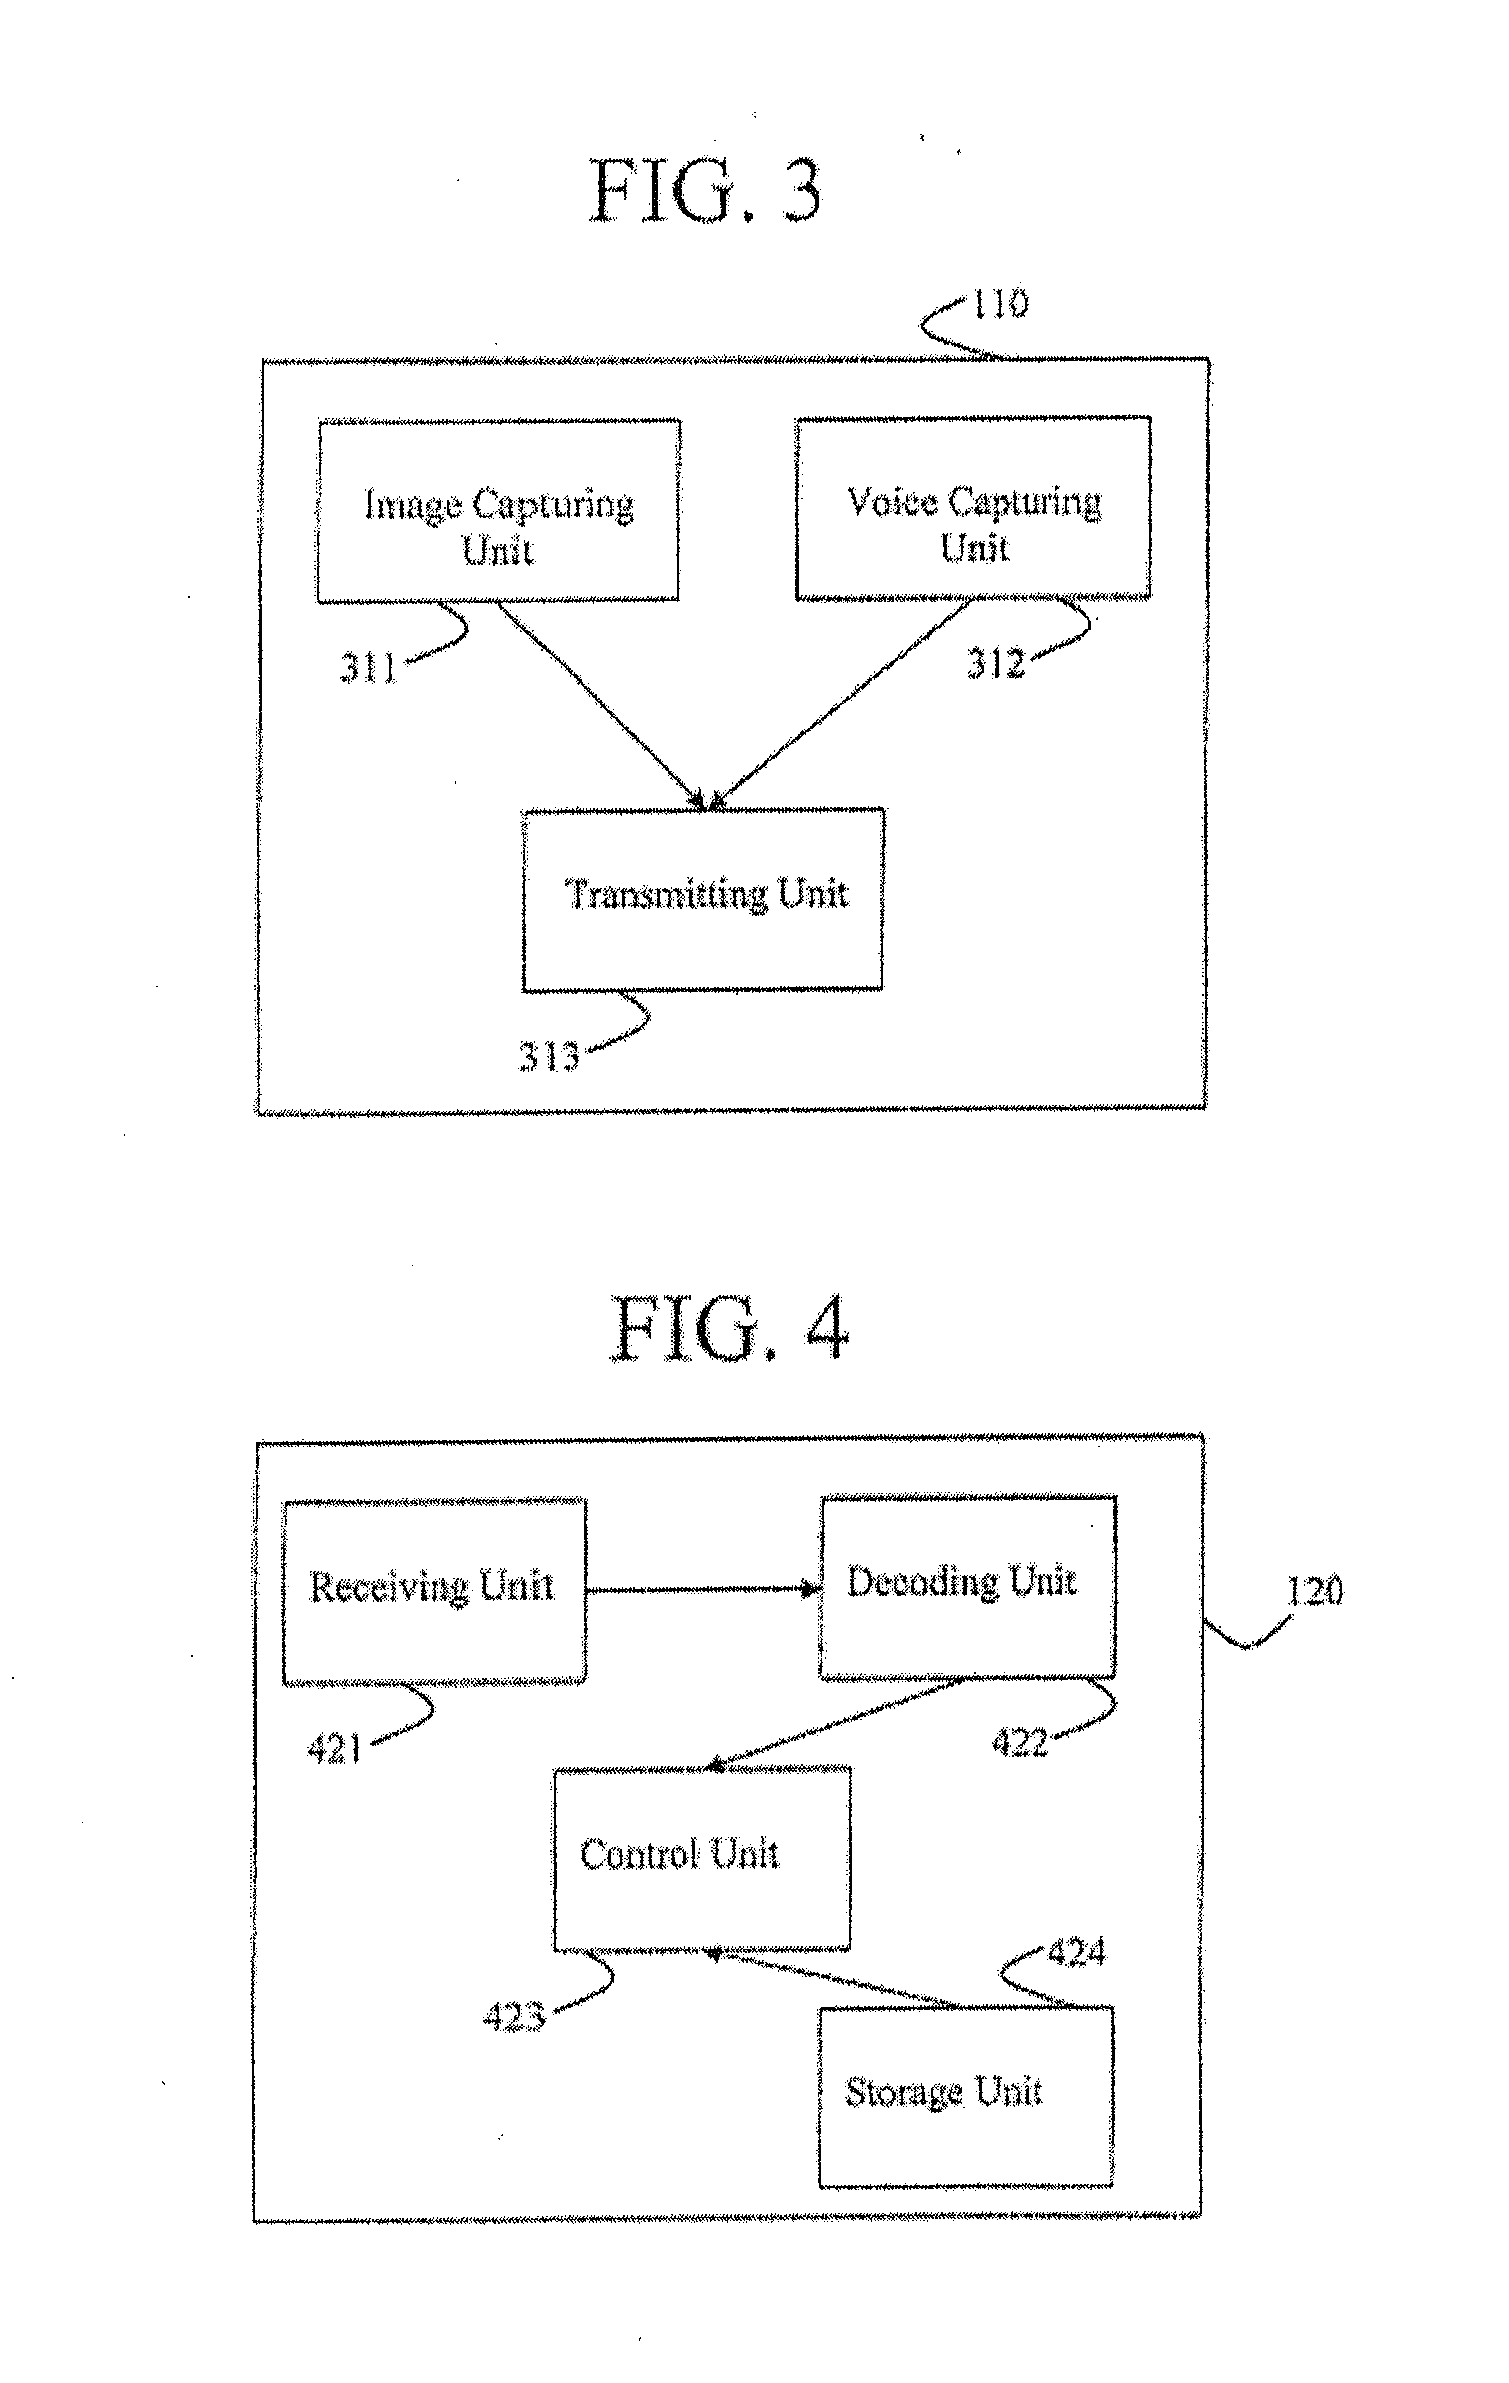 Method and system for collecting voice and image data on a remote device and coverting the combined data